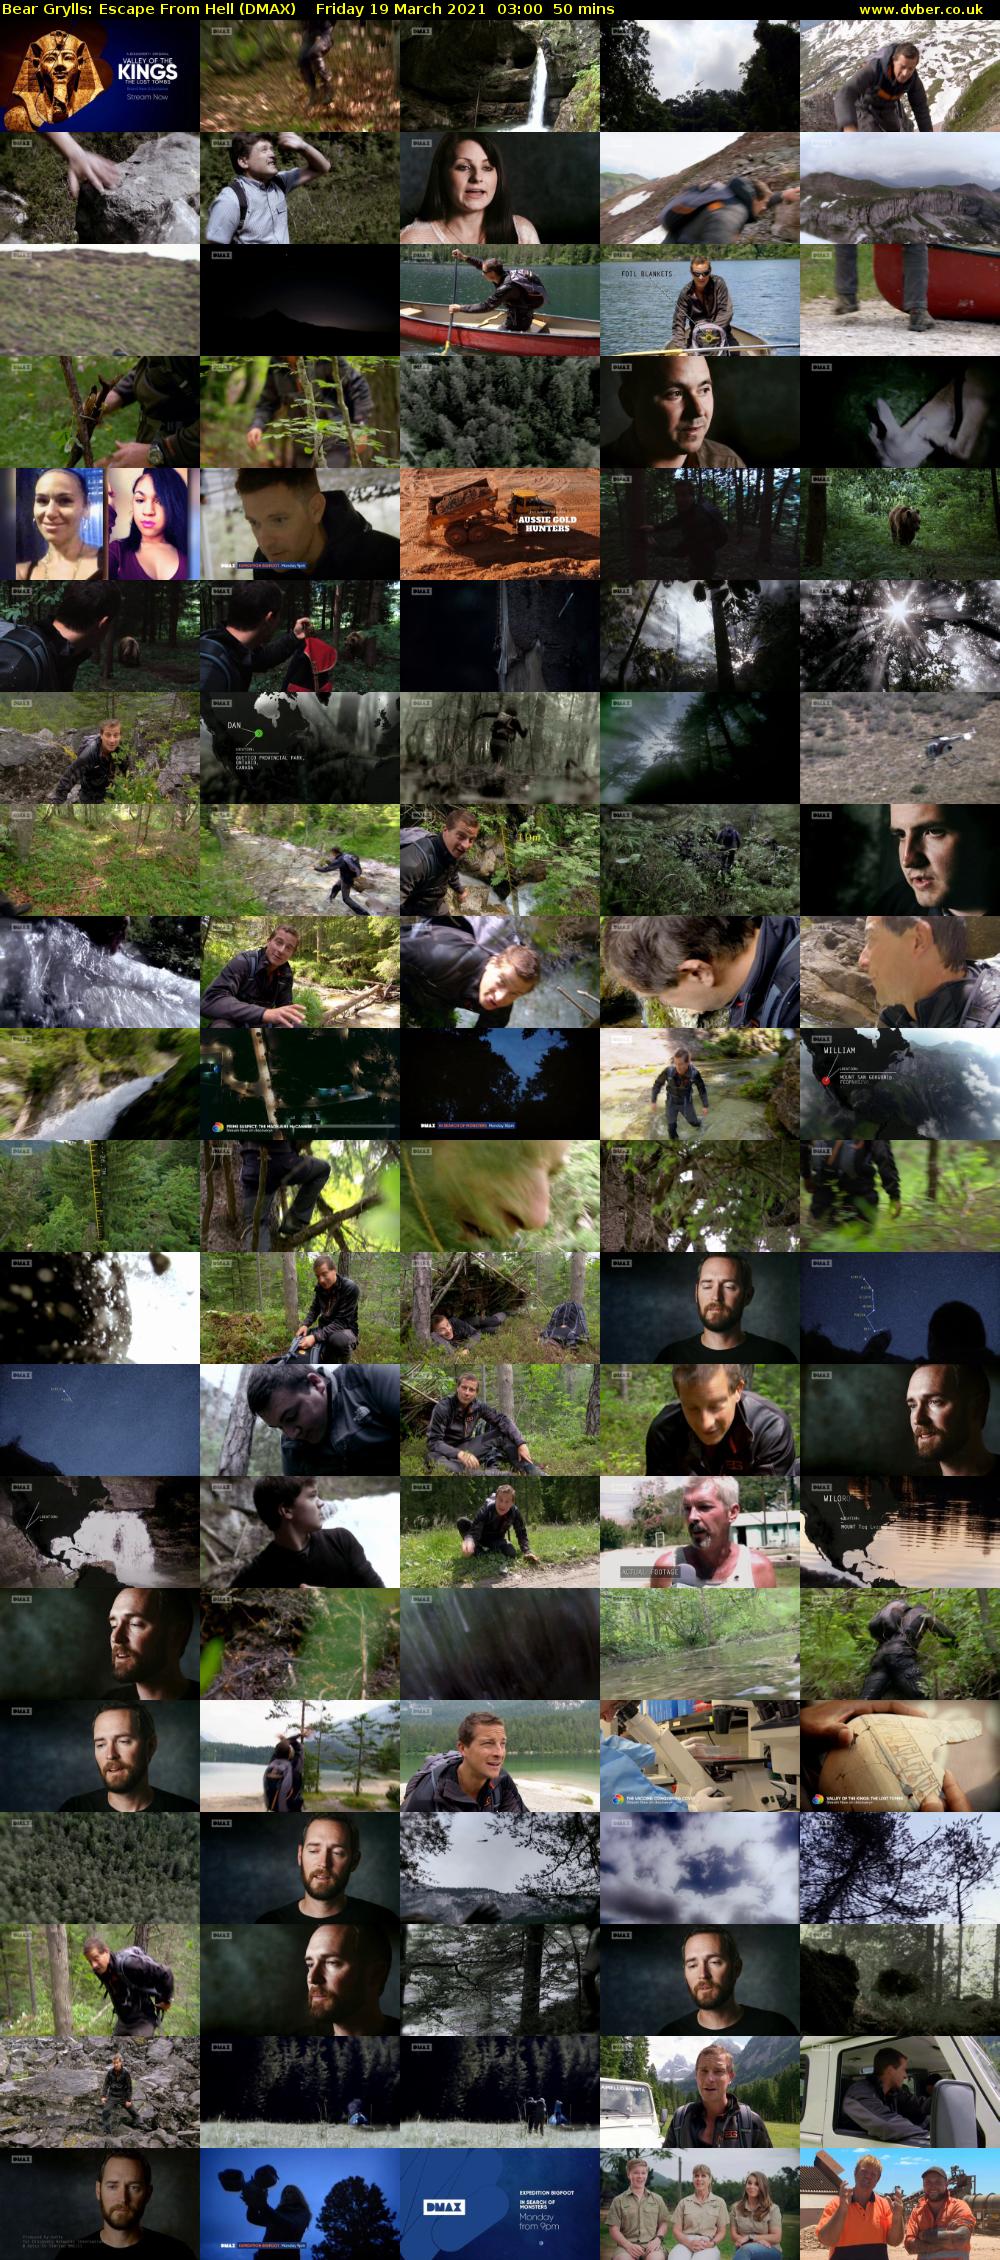 Bear Grylls: Escape From Hell (DMAX) Friday 19 March 2021 03:00 - 03:50